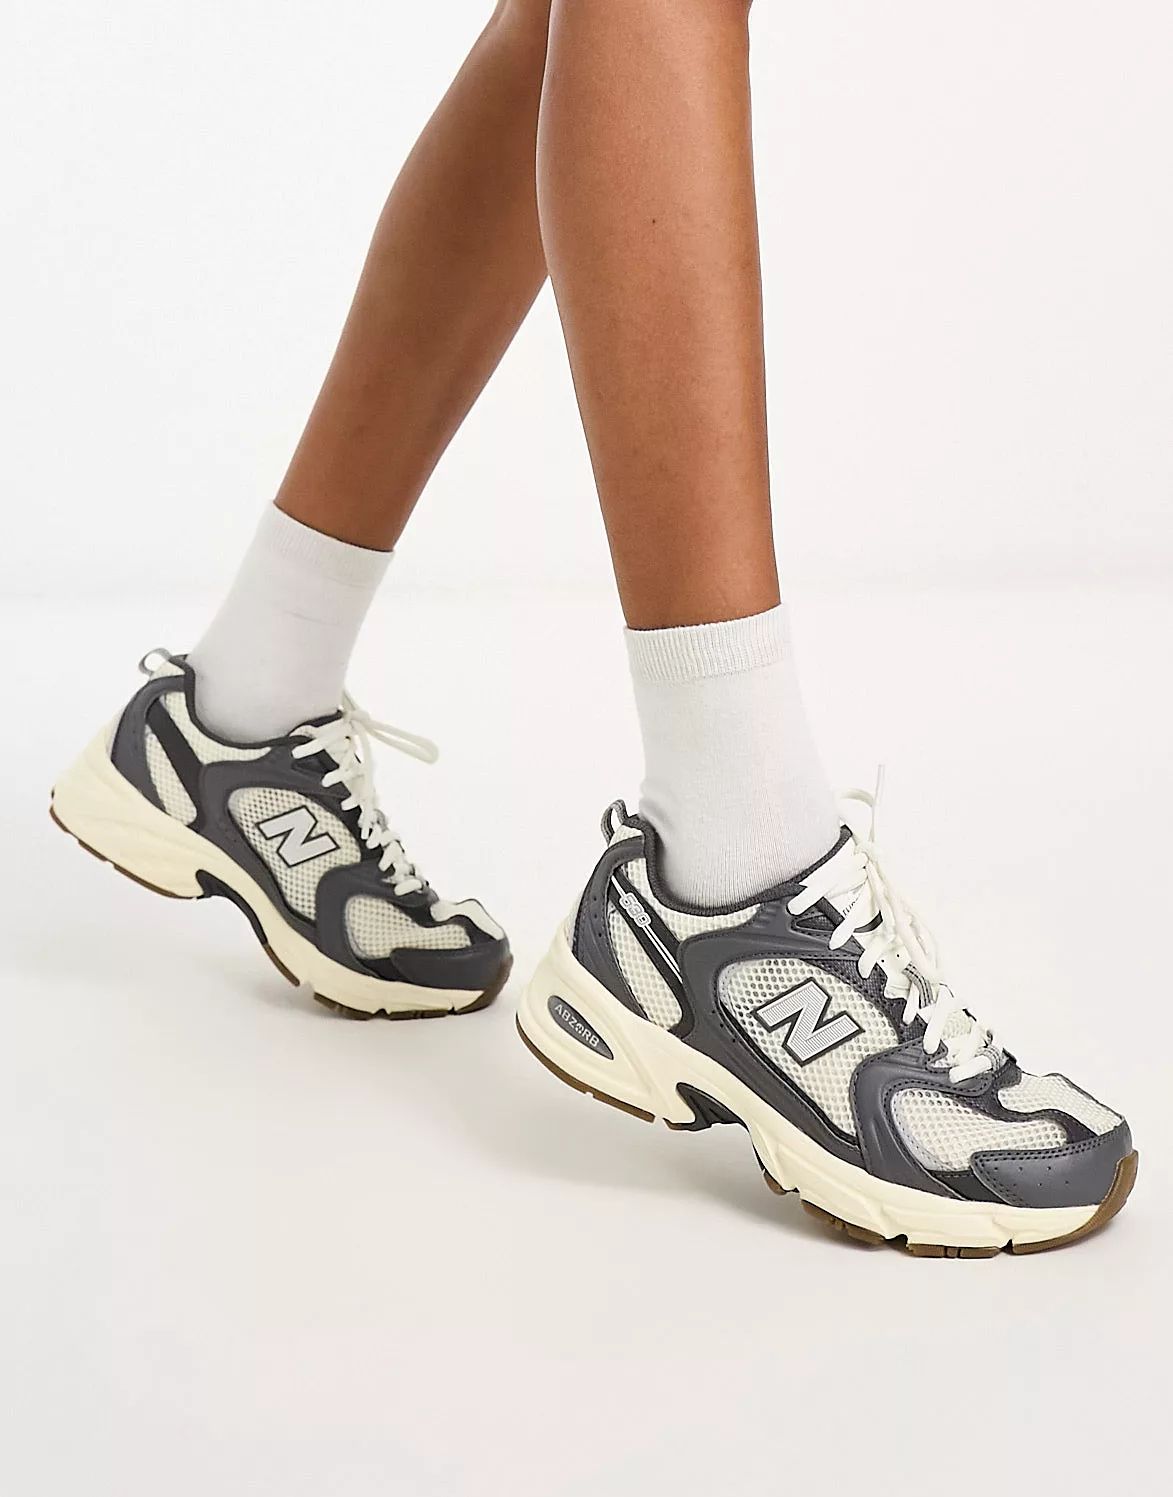 New Balance 530 sneakers in gray and white - Exclusive to ASOS | ASOS | ASOS (Global)